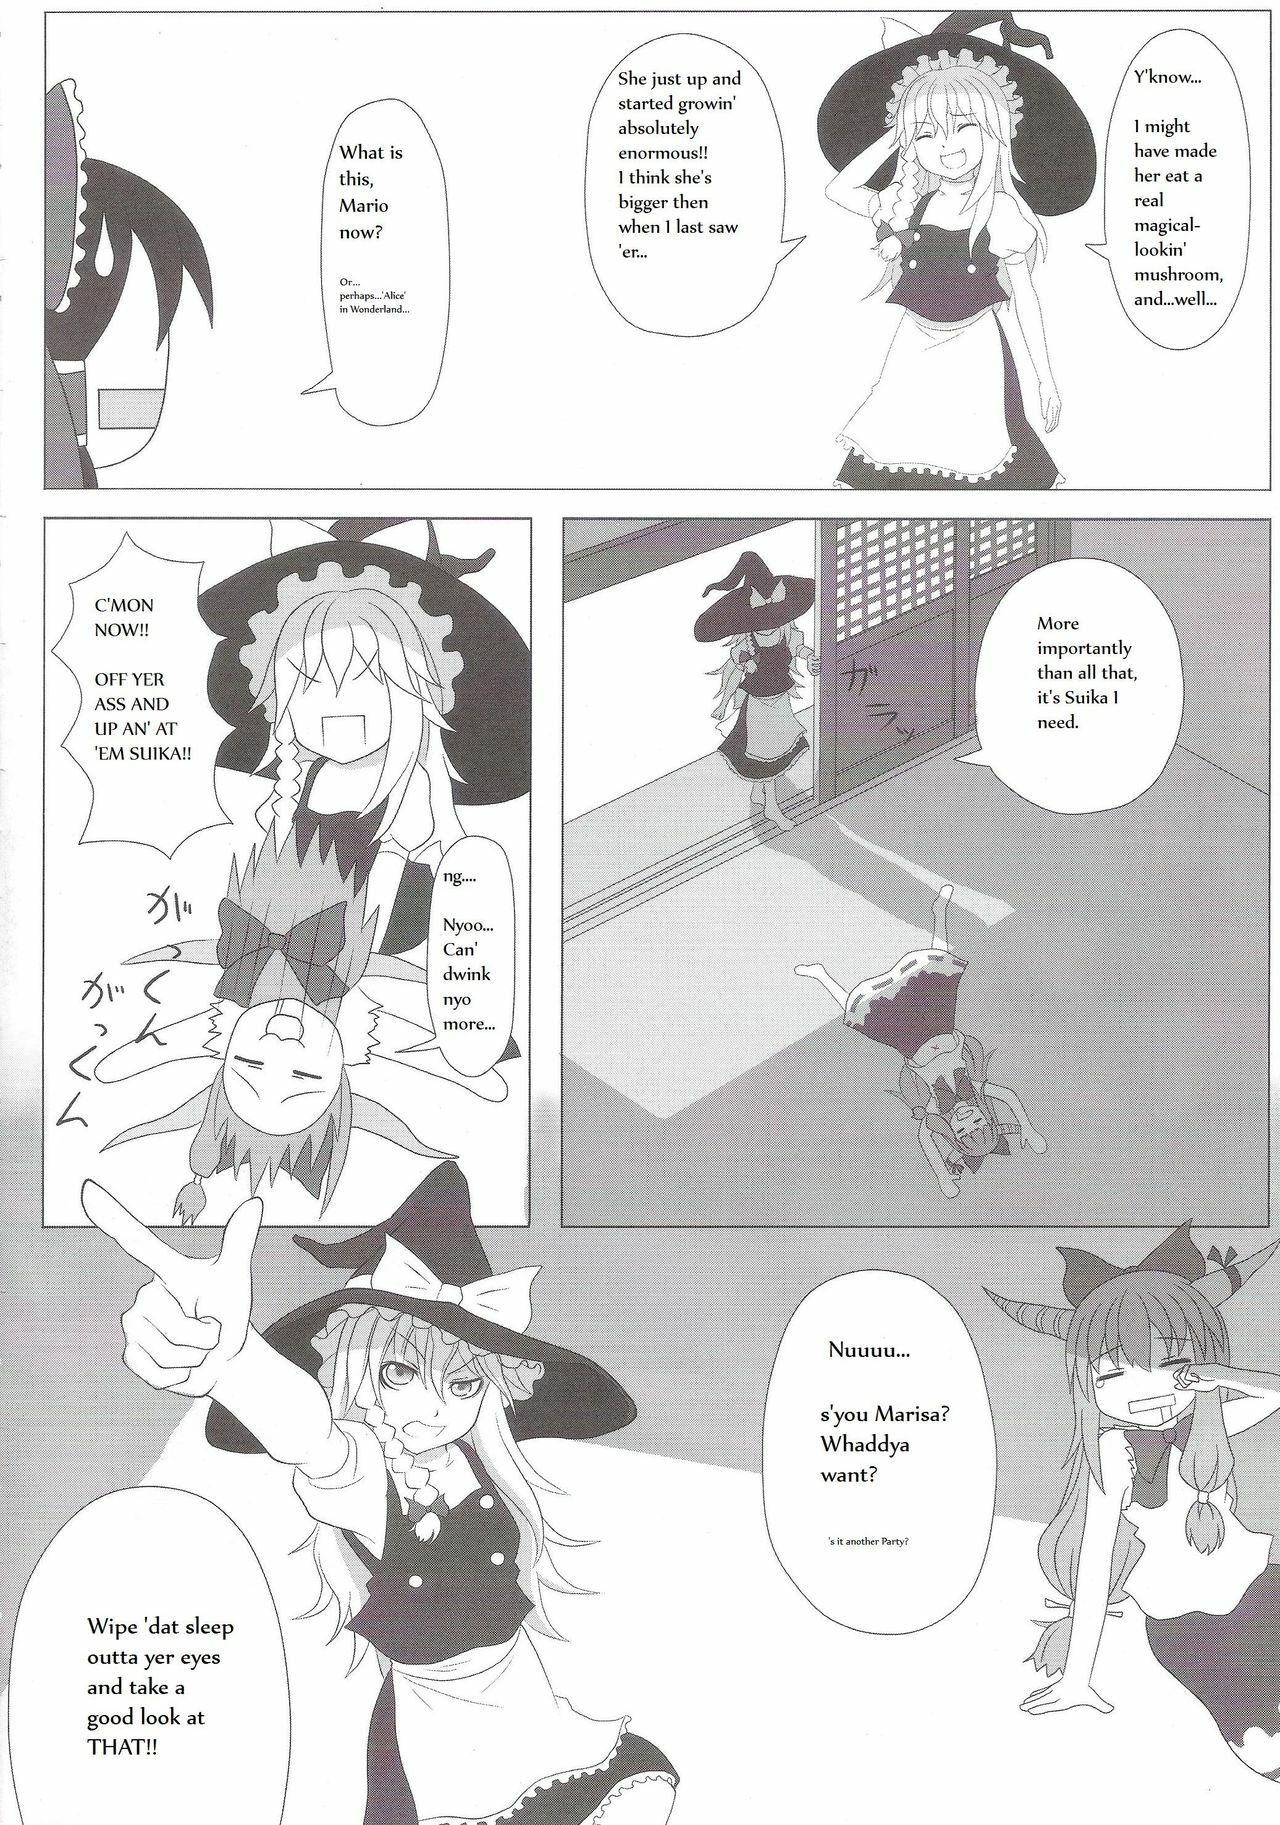 Touhou Super Dreadnaught (Magical) Girl English page 4 full